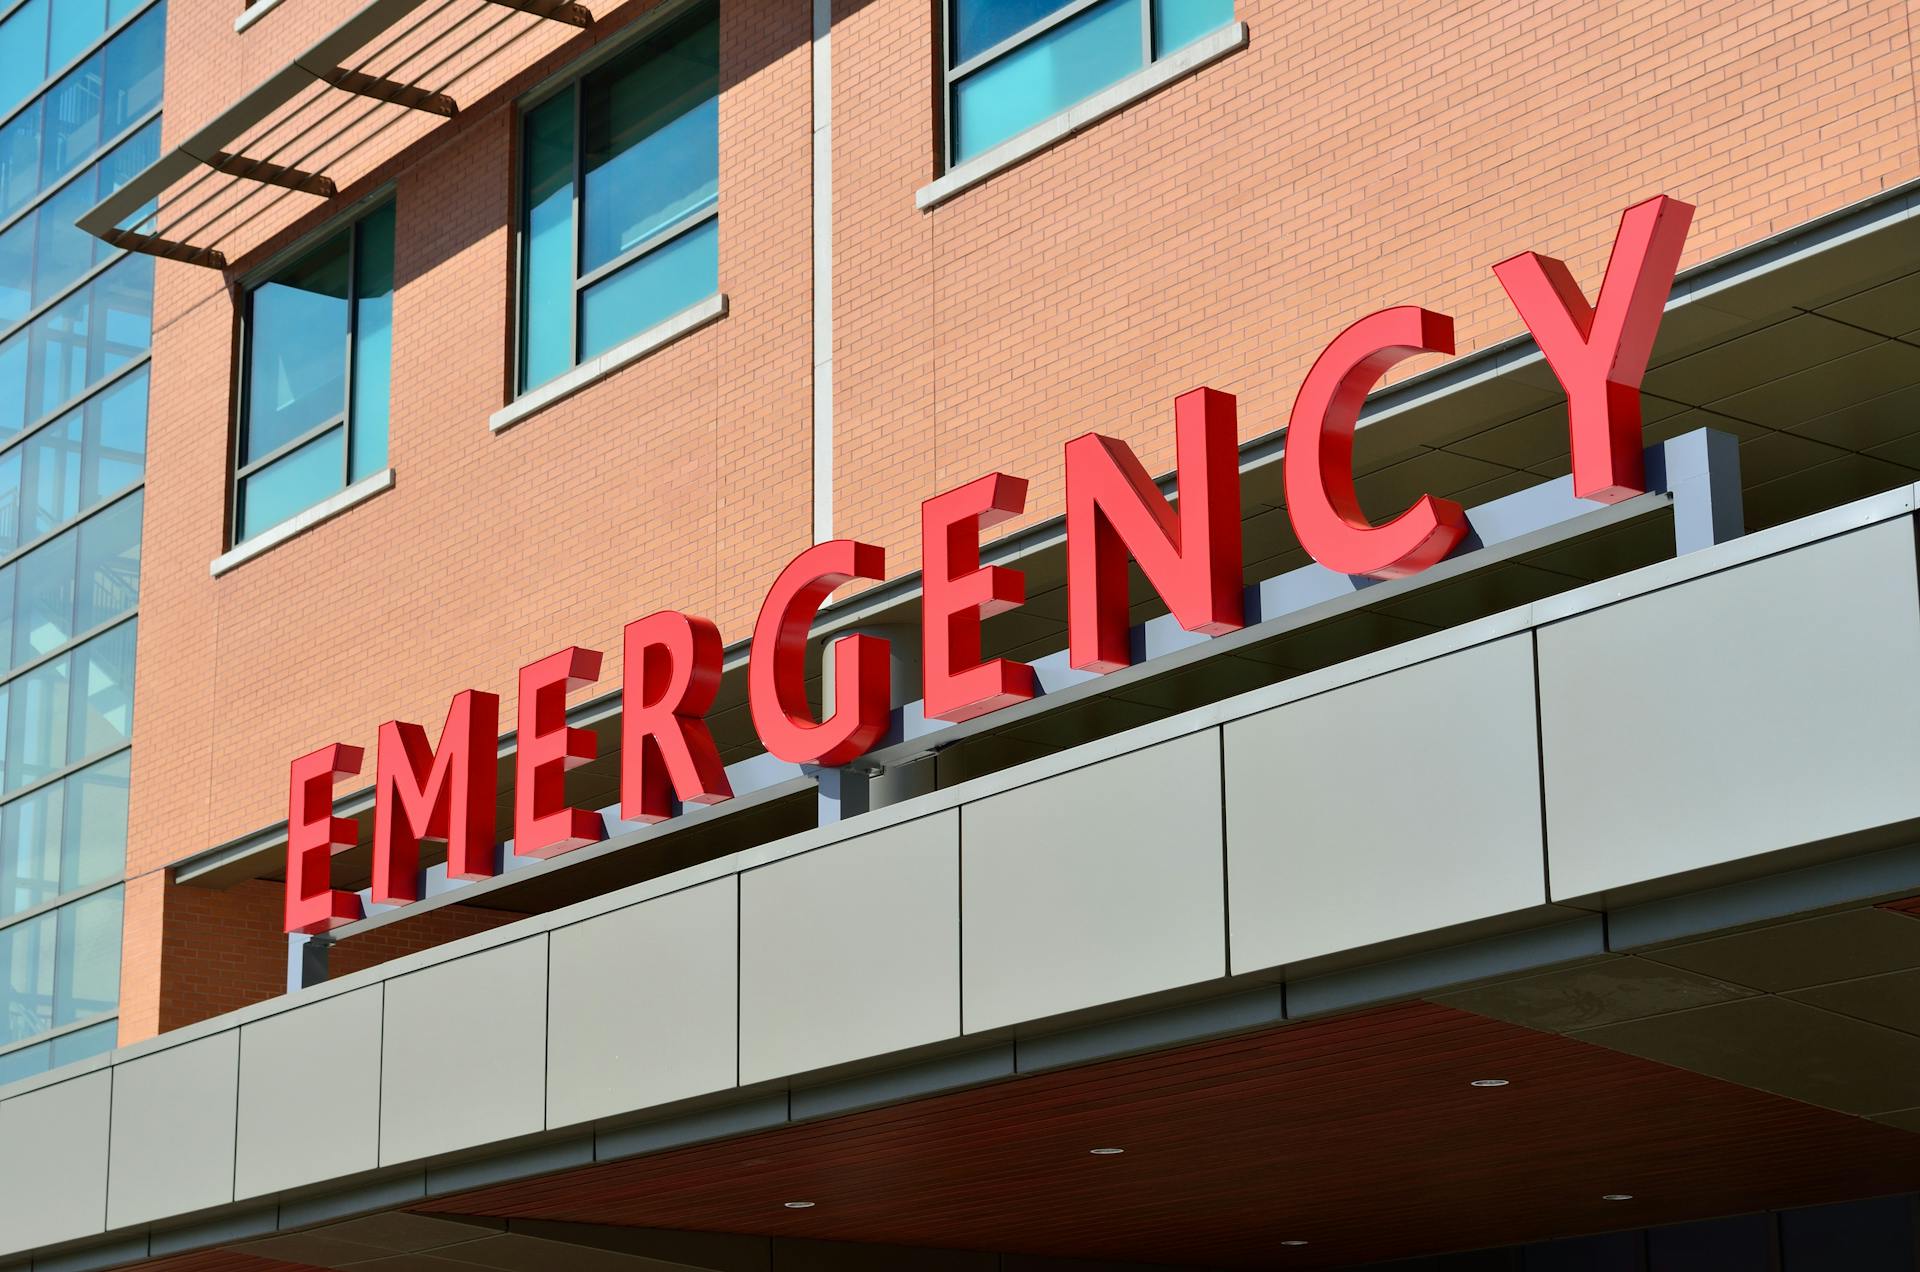 An emergency sign at a hospital. For illustration purposes only  | Source: Pexels